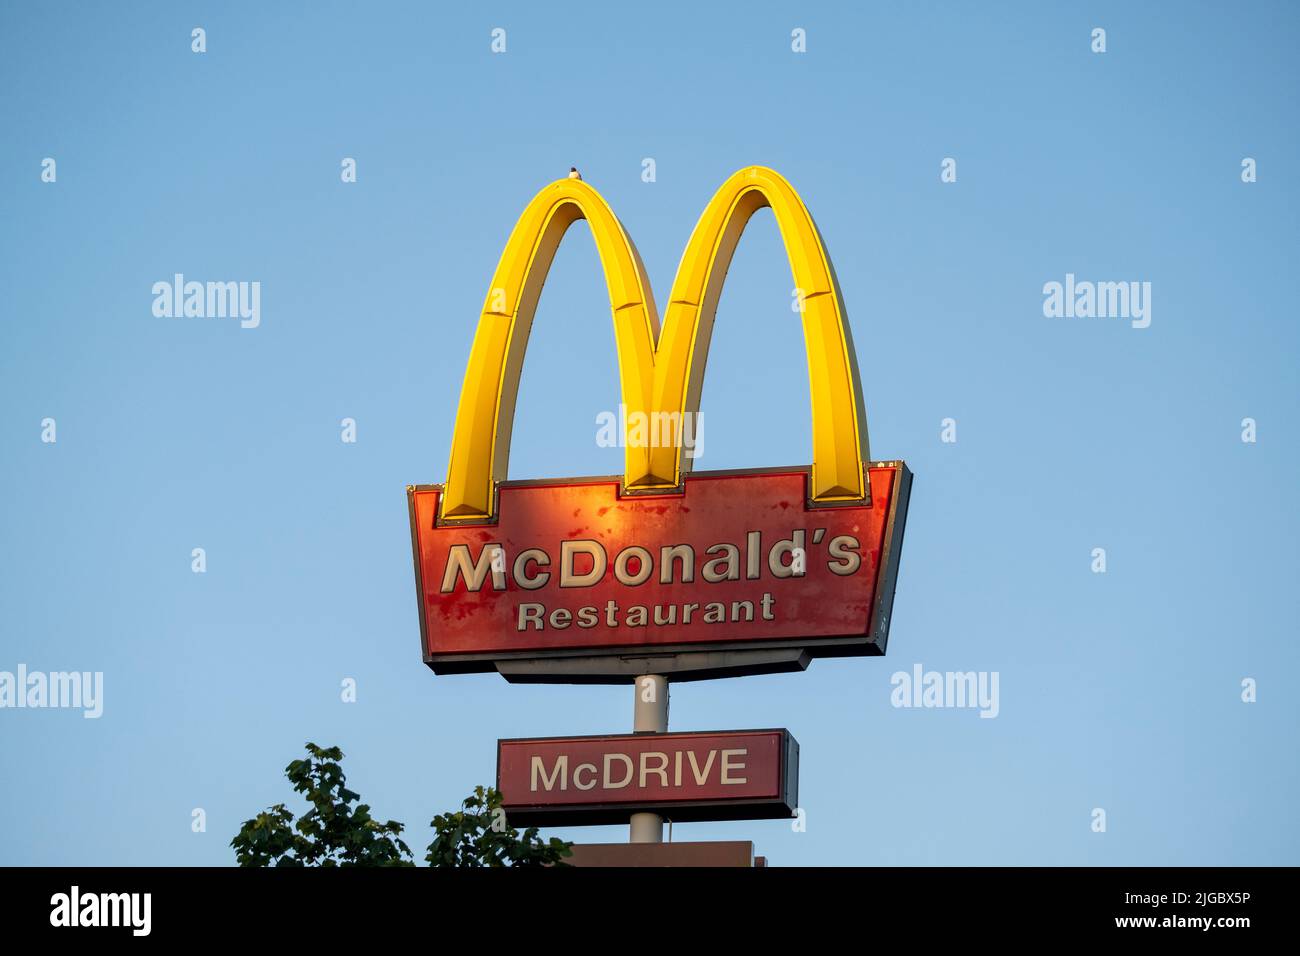 Helsinki / Finland - JULY 5, 2022: A tall Mc Donald's sign against a bright blue sky Stock Photo